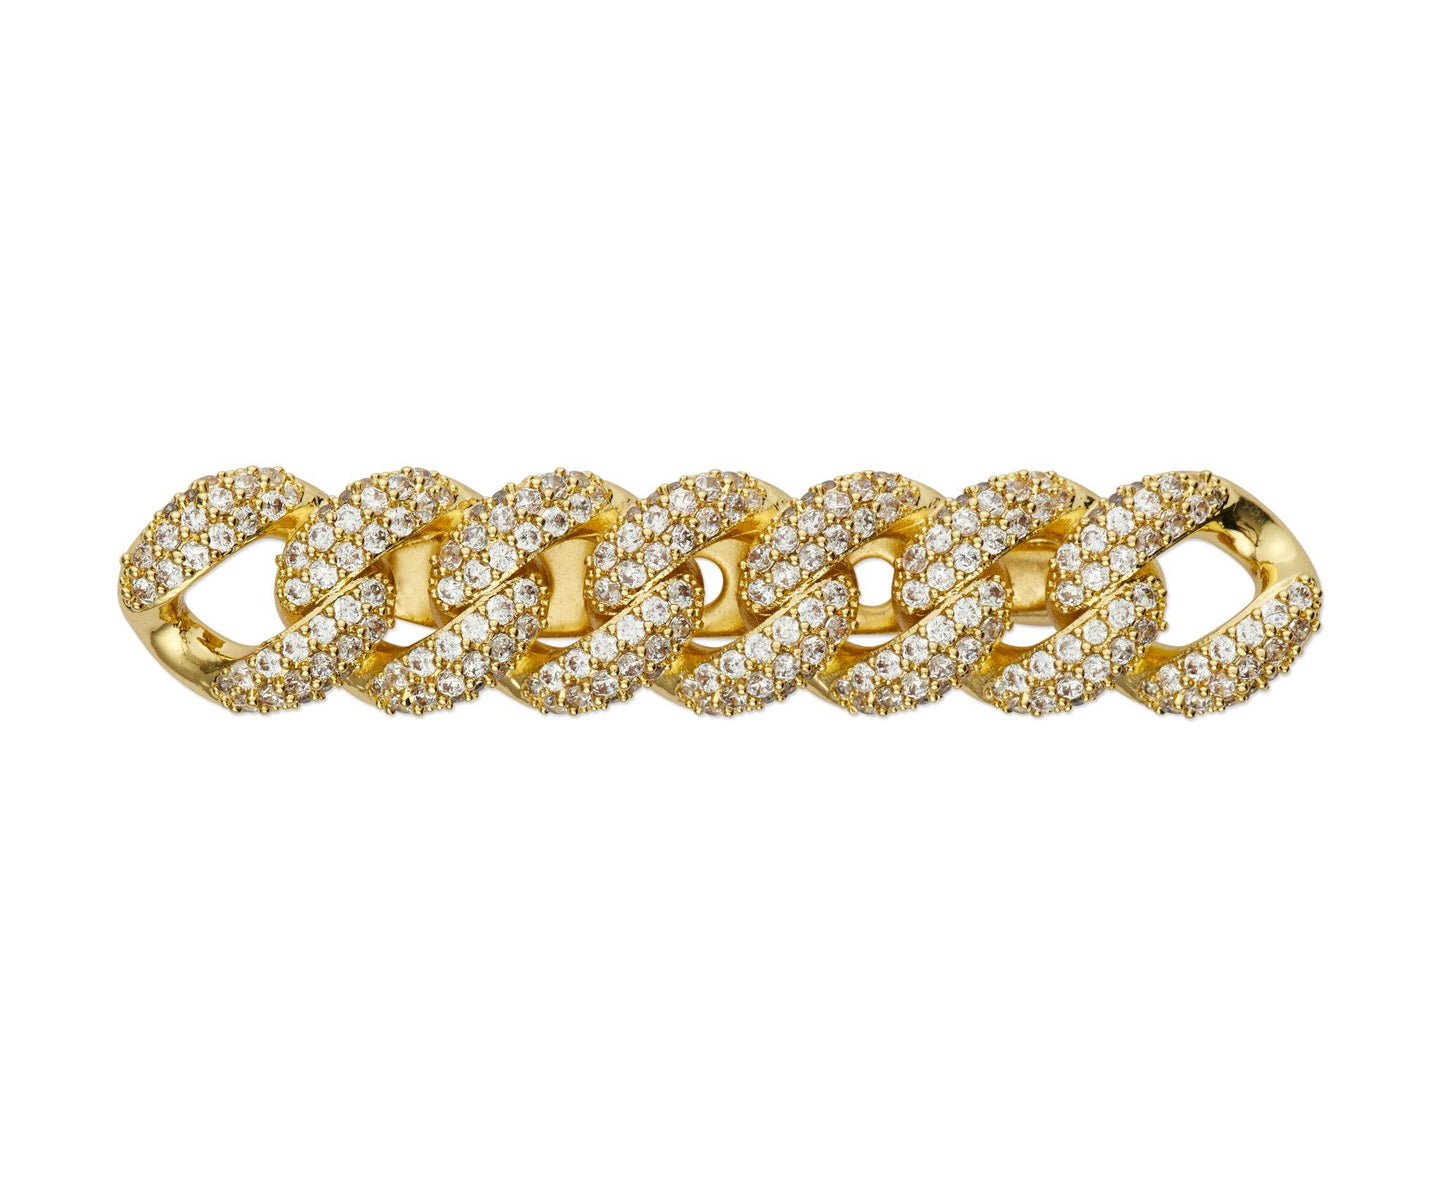 Cuban Link Lapel Pin - InclusiveJewelry